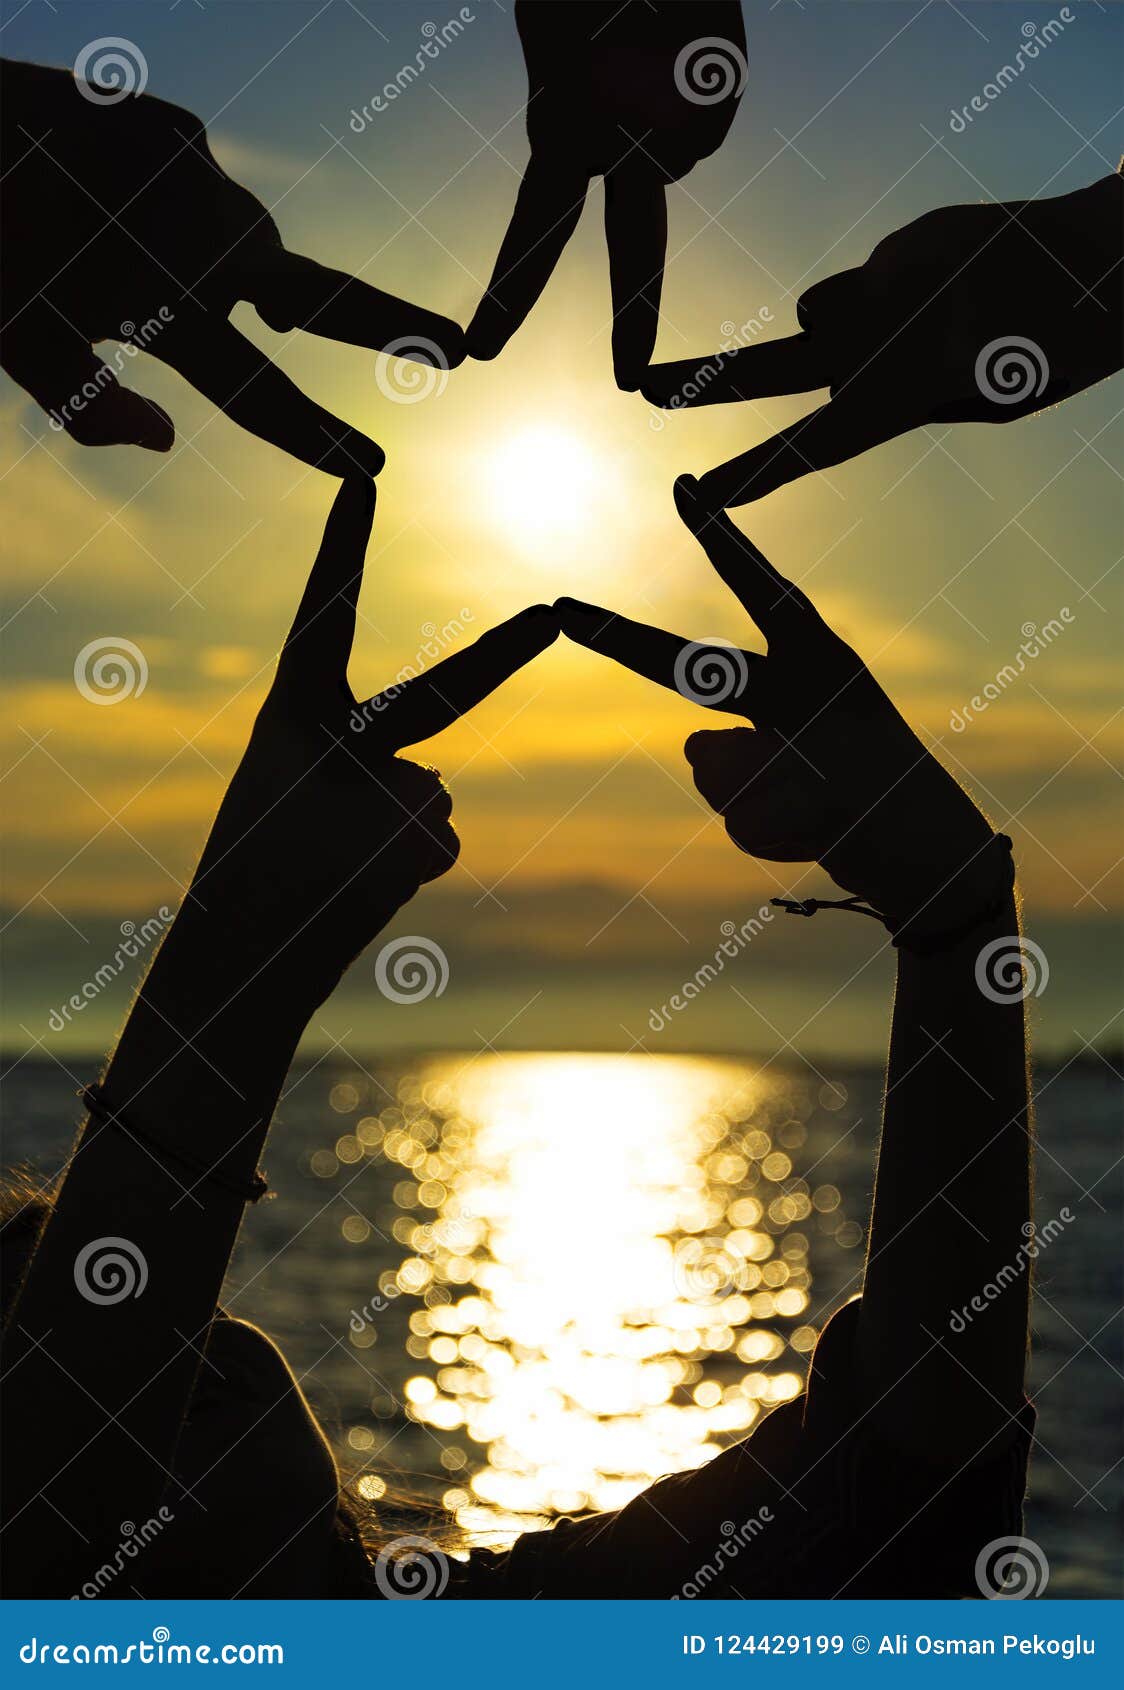 many hands connecting to star  at sunset, teamwork concept